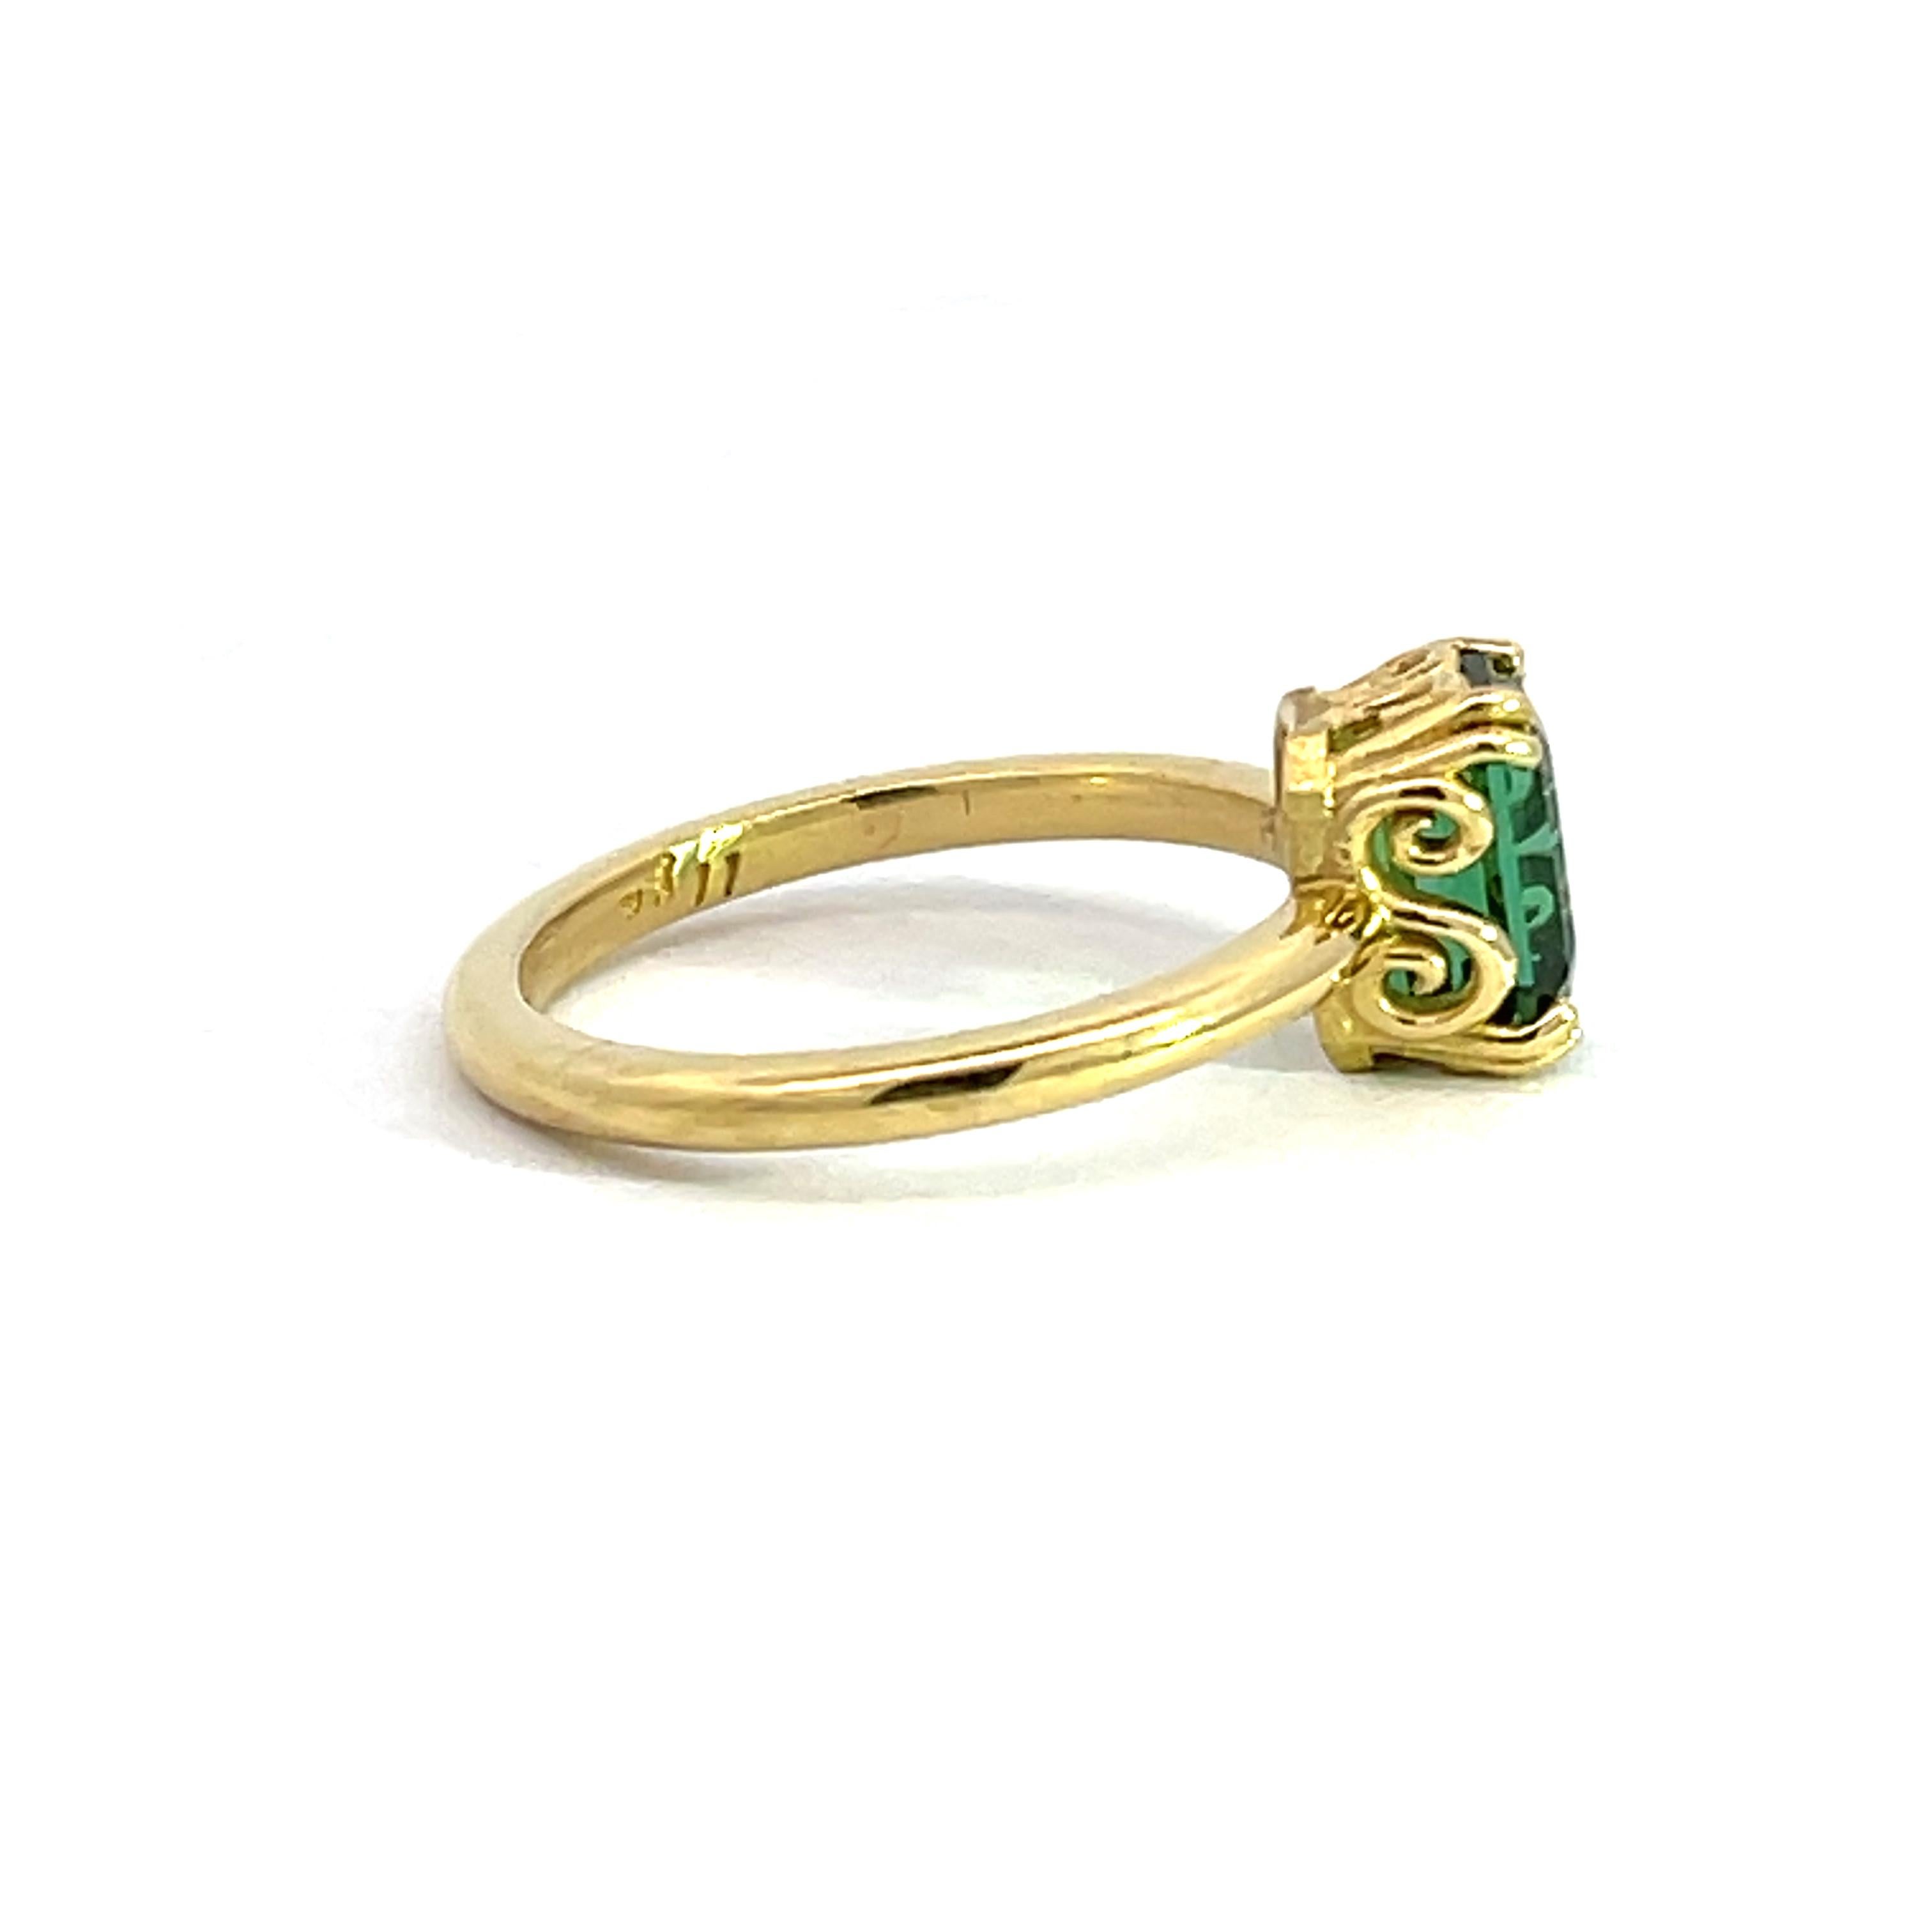 An 18k yellow gold cocktail ring with a 1.95 carat green tourmaline, size 7. This ring was designed and made by llyn strong